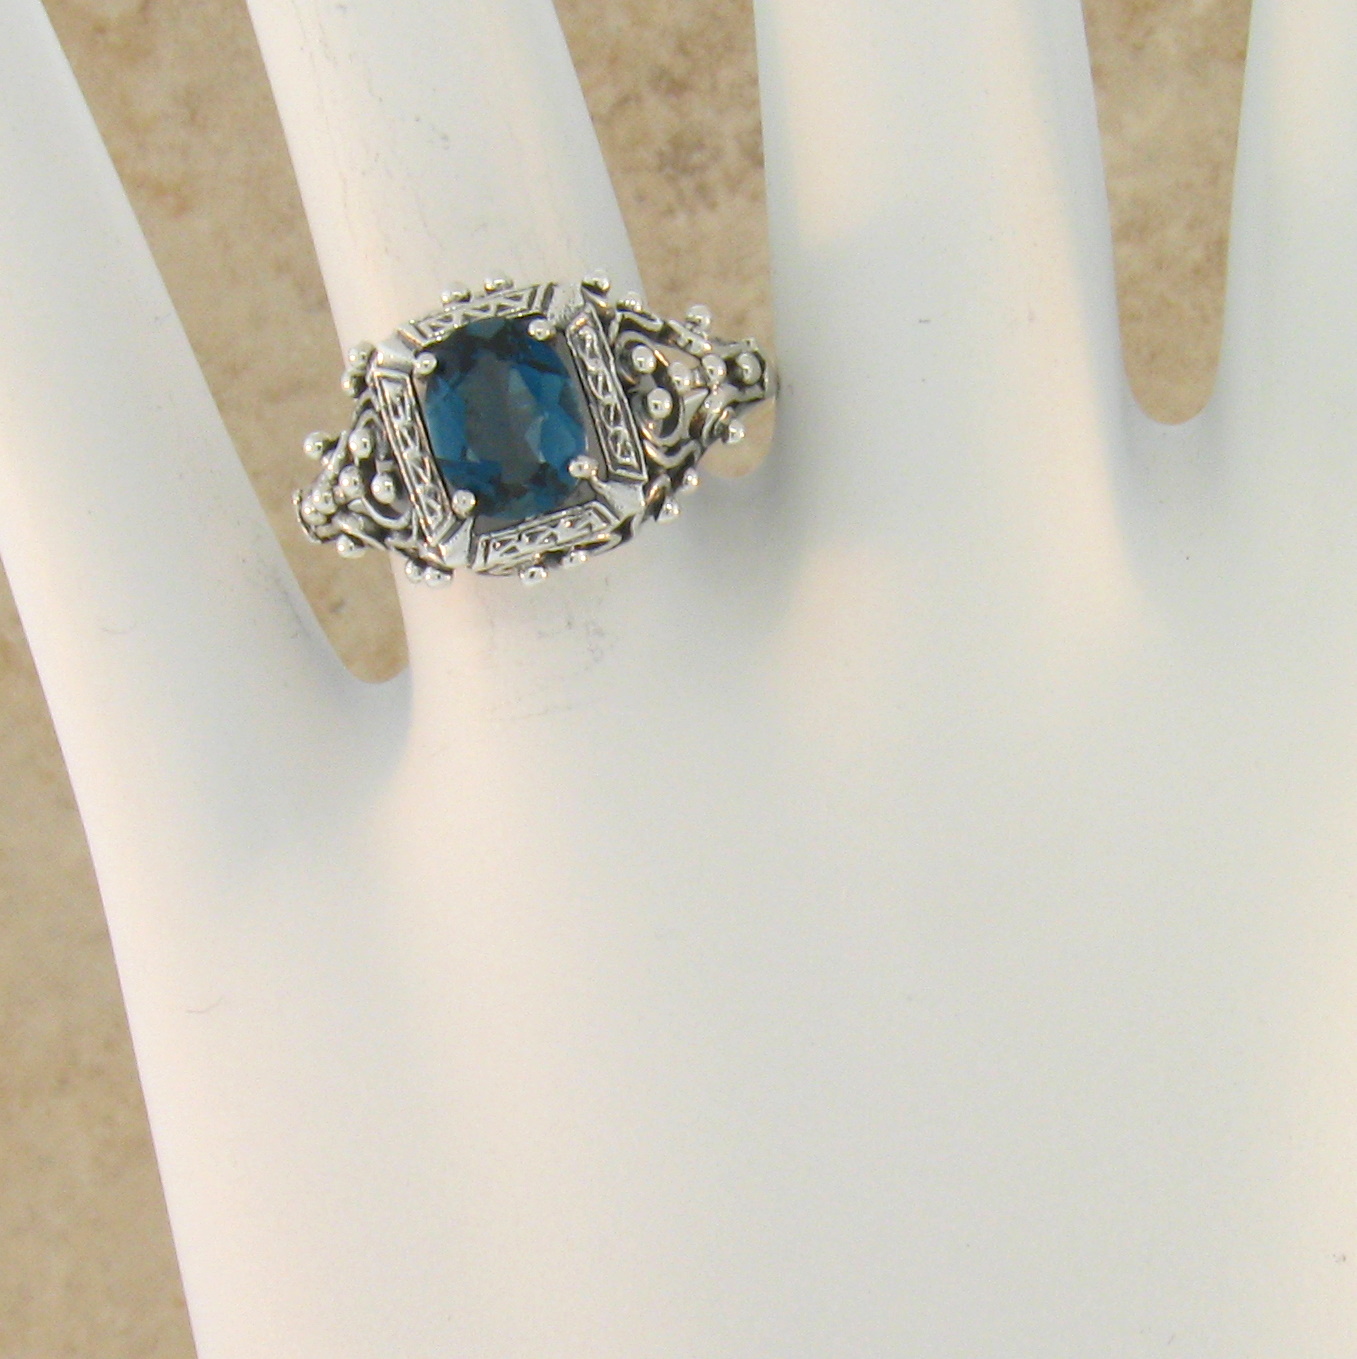 Details about   GENUINE LONDON BLUE TOPAZ ANTIQUE STYLE 925 STERLING SILVER RING SIZE 7 #1004 